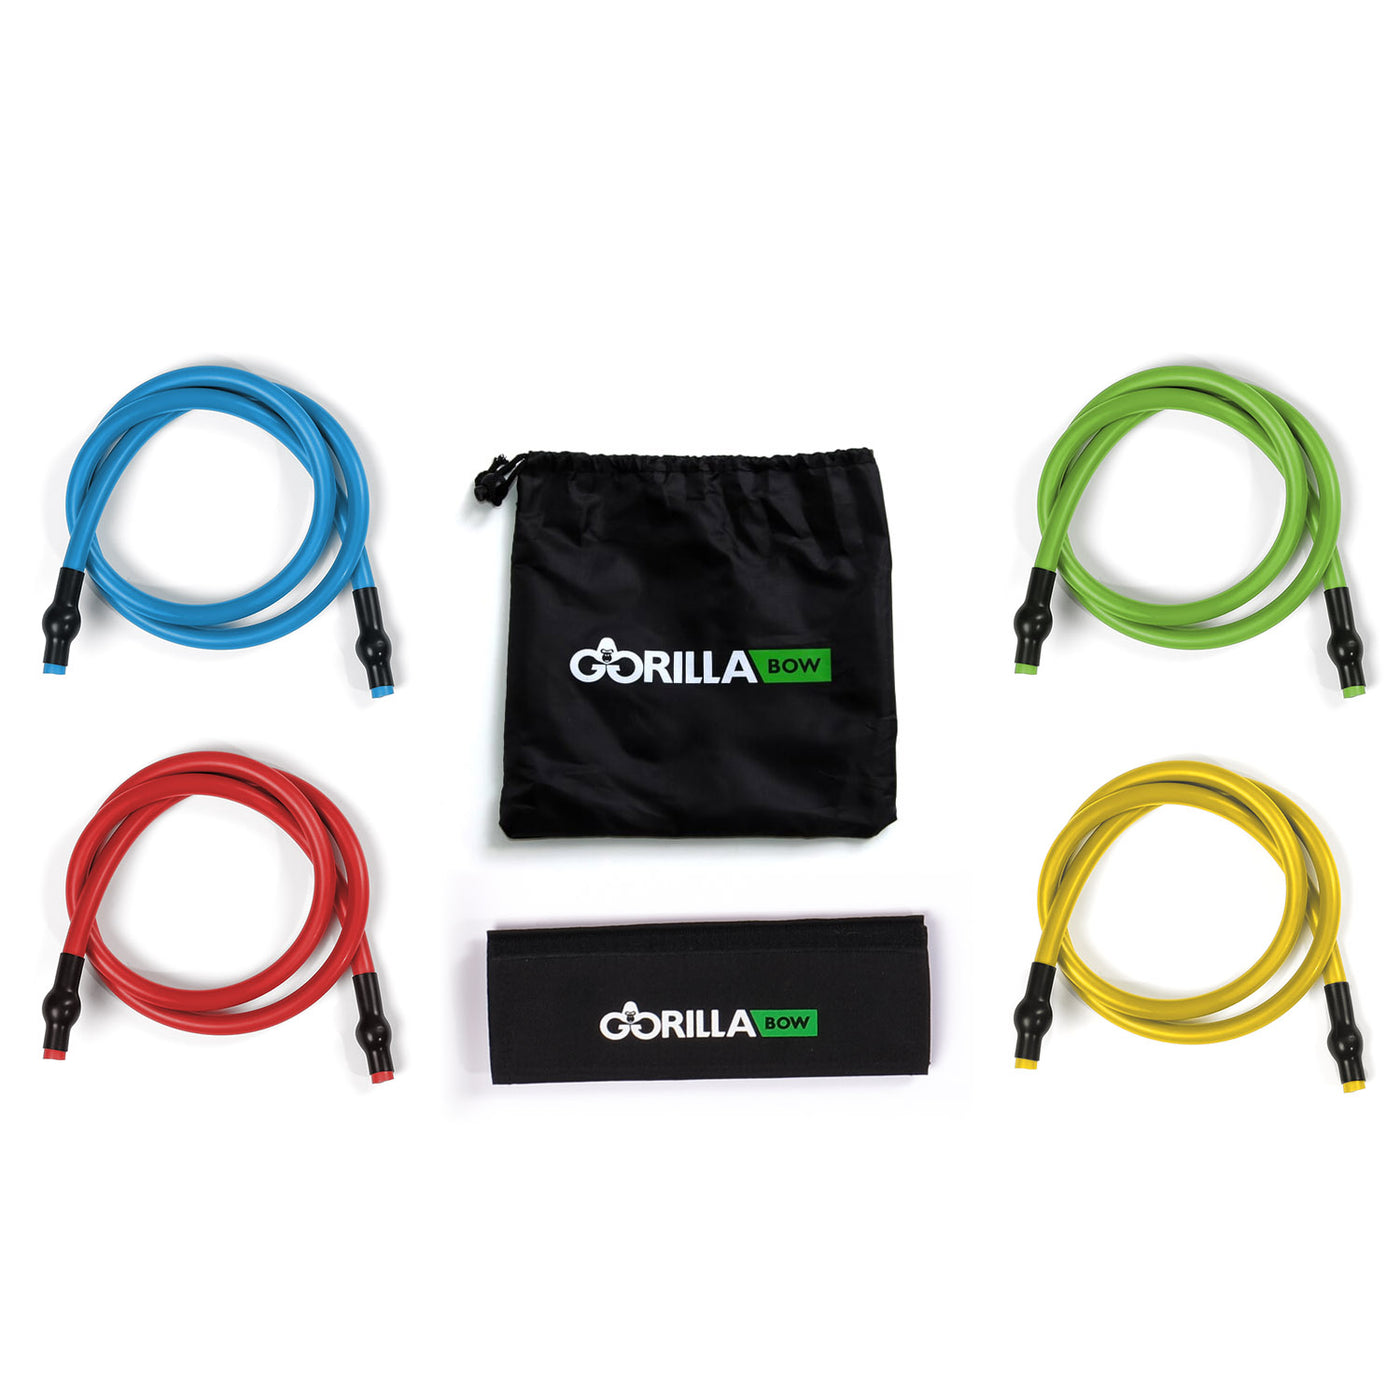 Gorilla Bow Wrap and Bands in assorted colors with carrying pouch